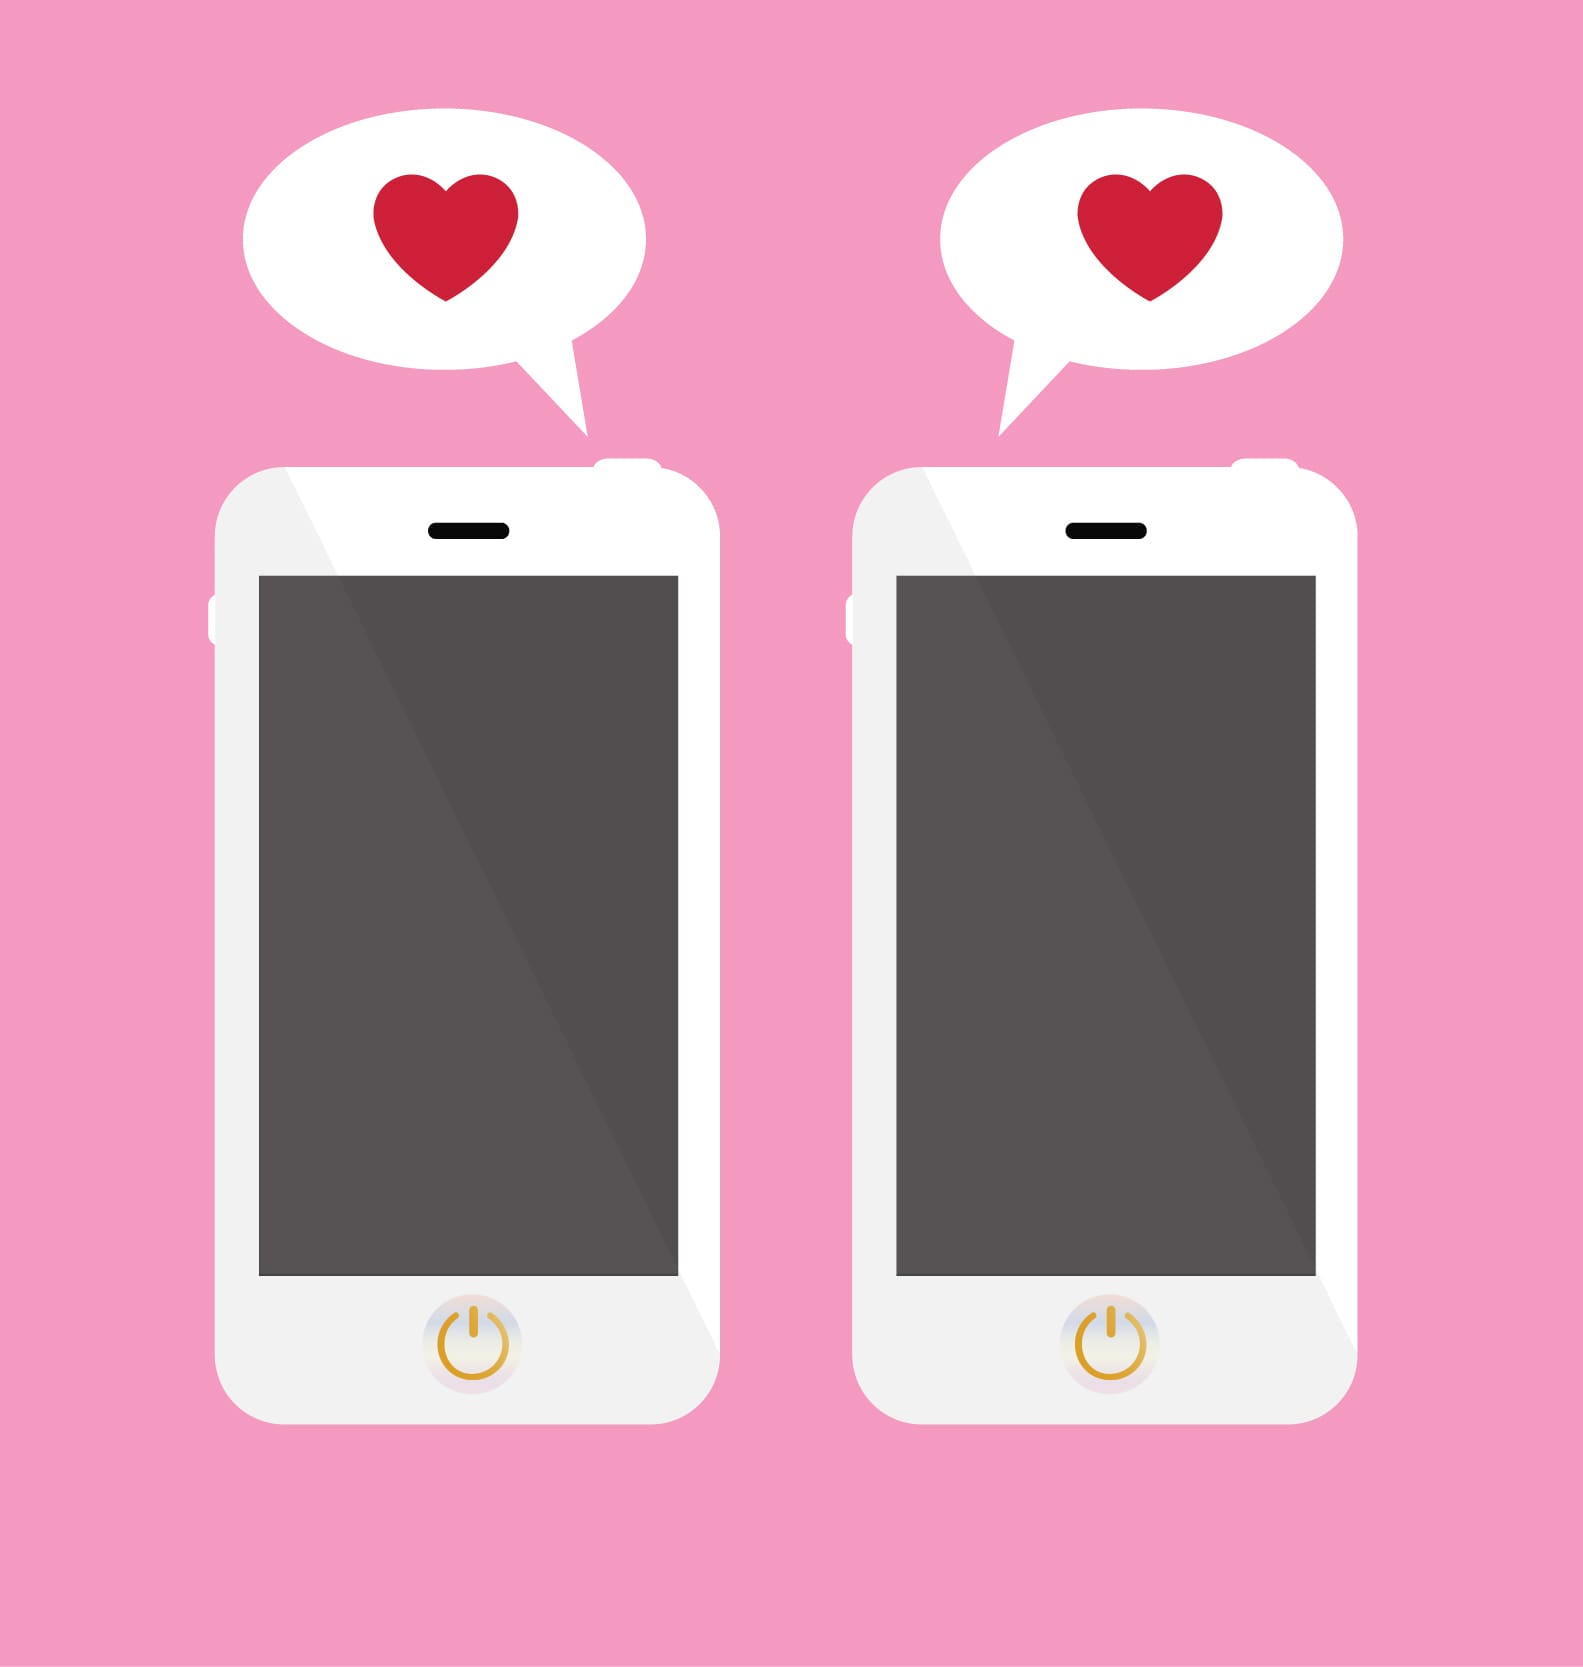 Two mobile phones and love hearts